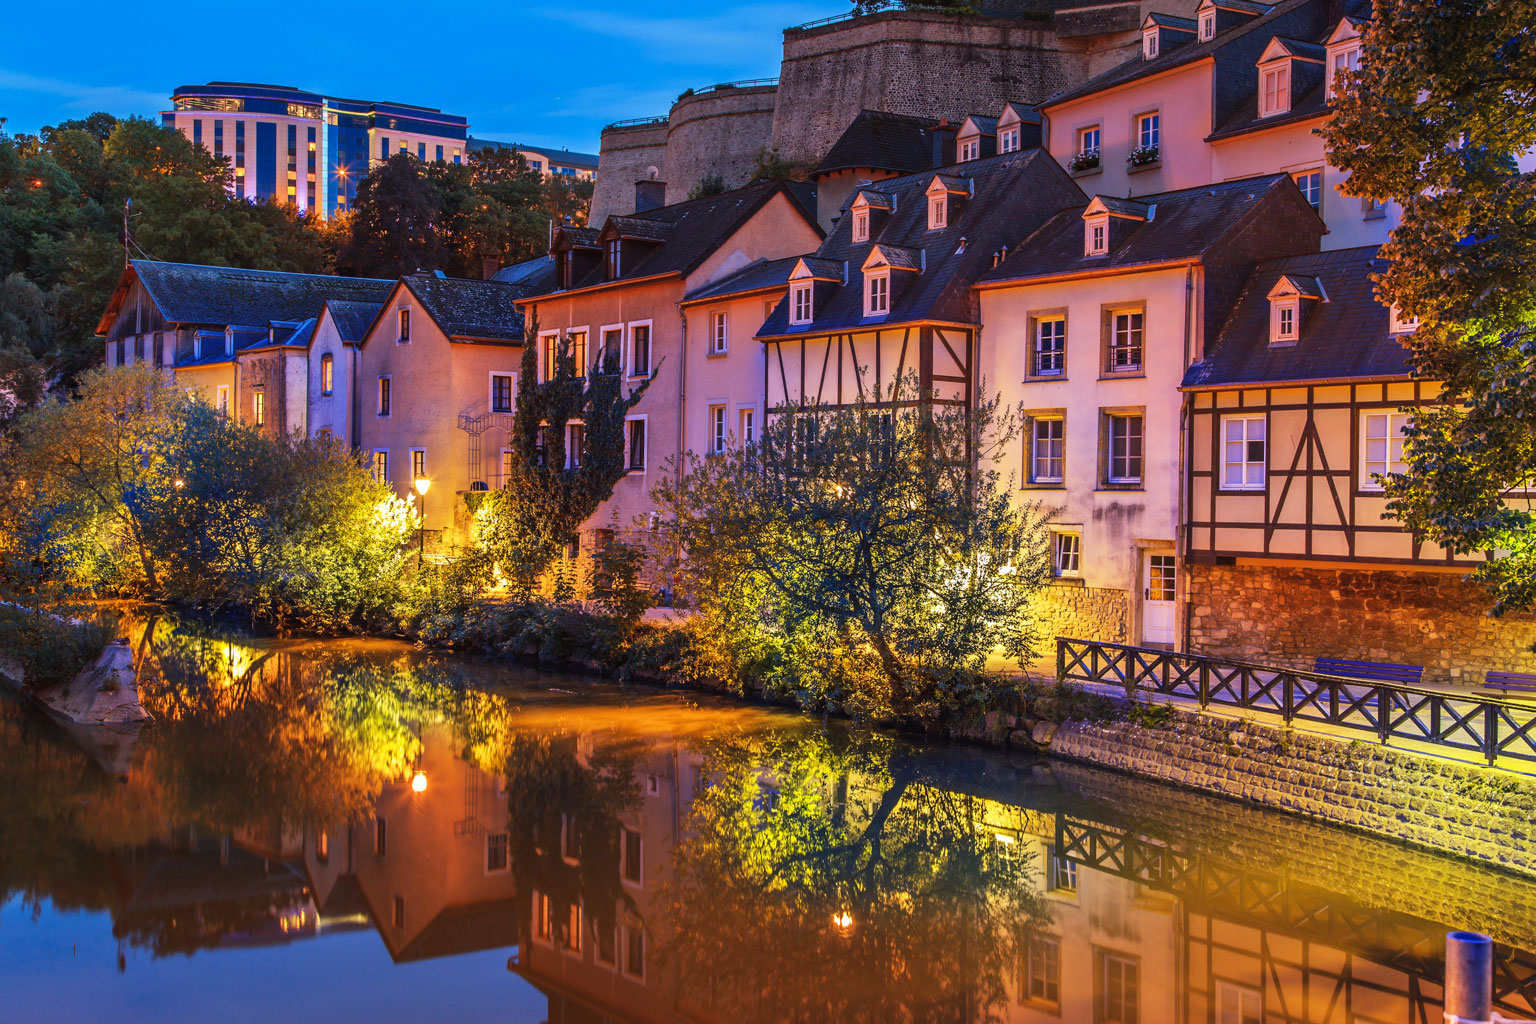 tourism-in-luxembourg-city-luxembourg-europe-s-best-destinations